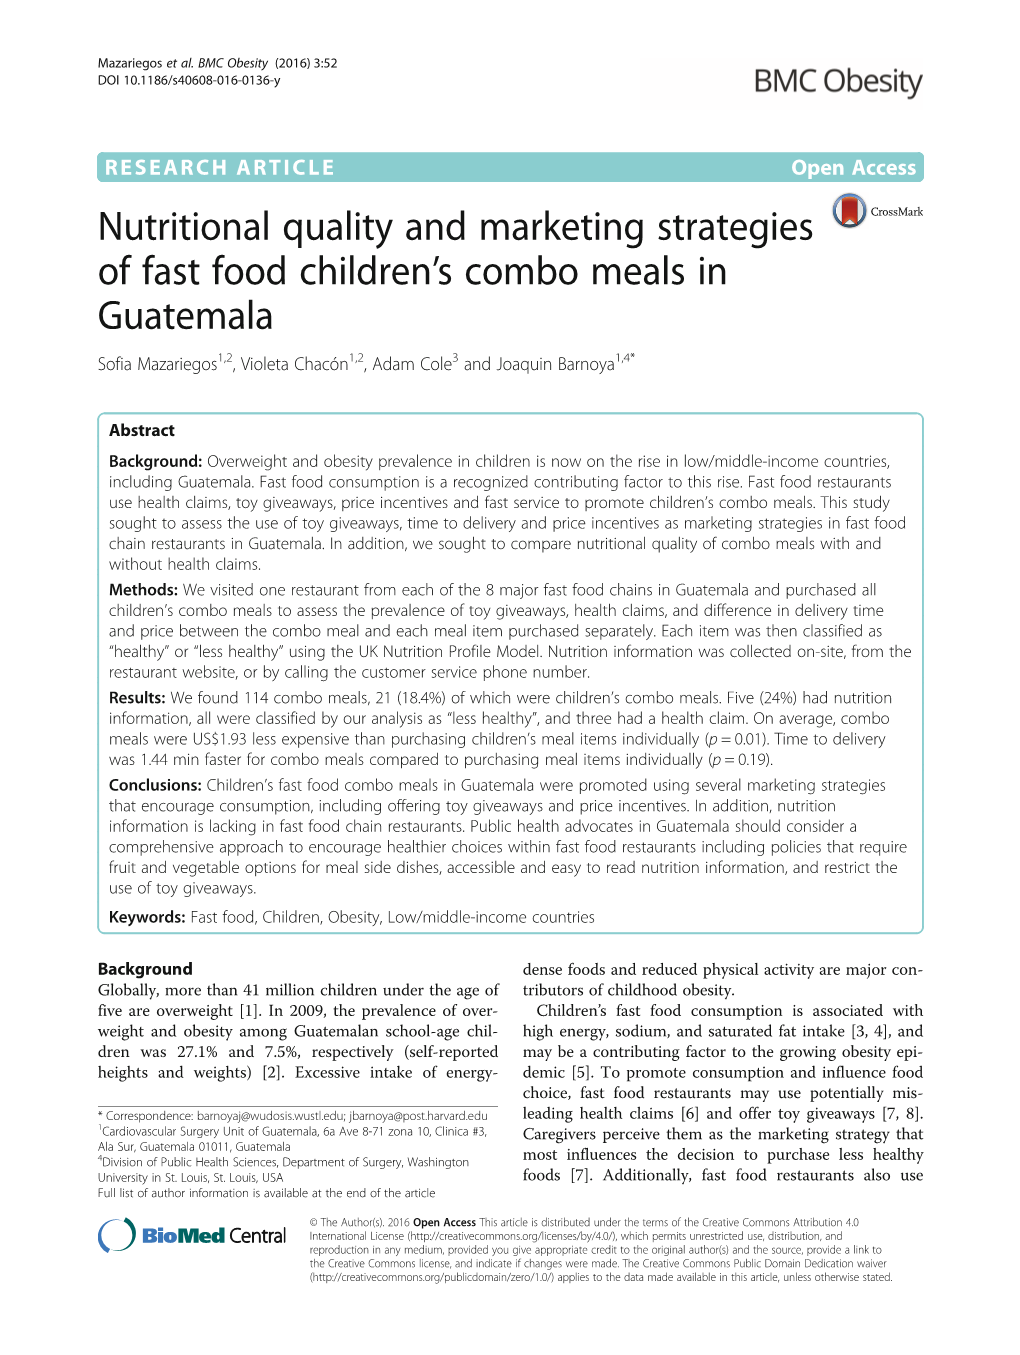 Nutritional Quality and Marketing Strategies of Fast Food Children's